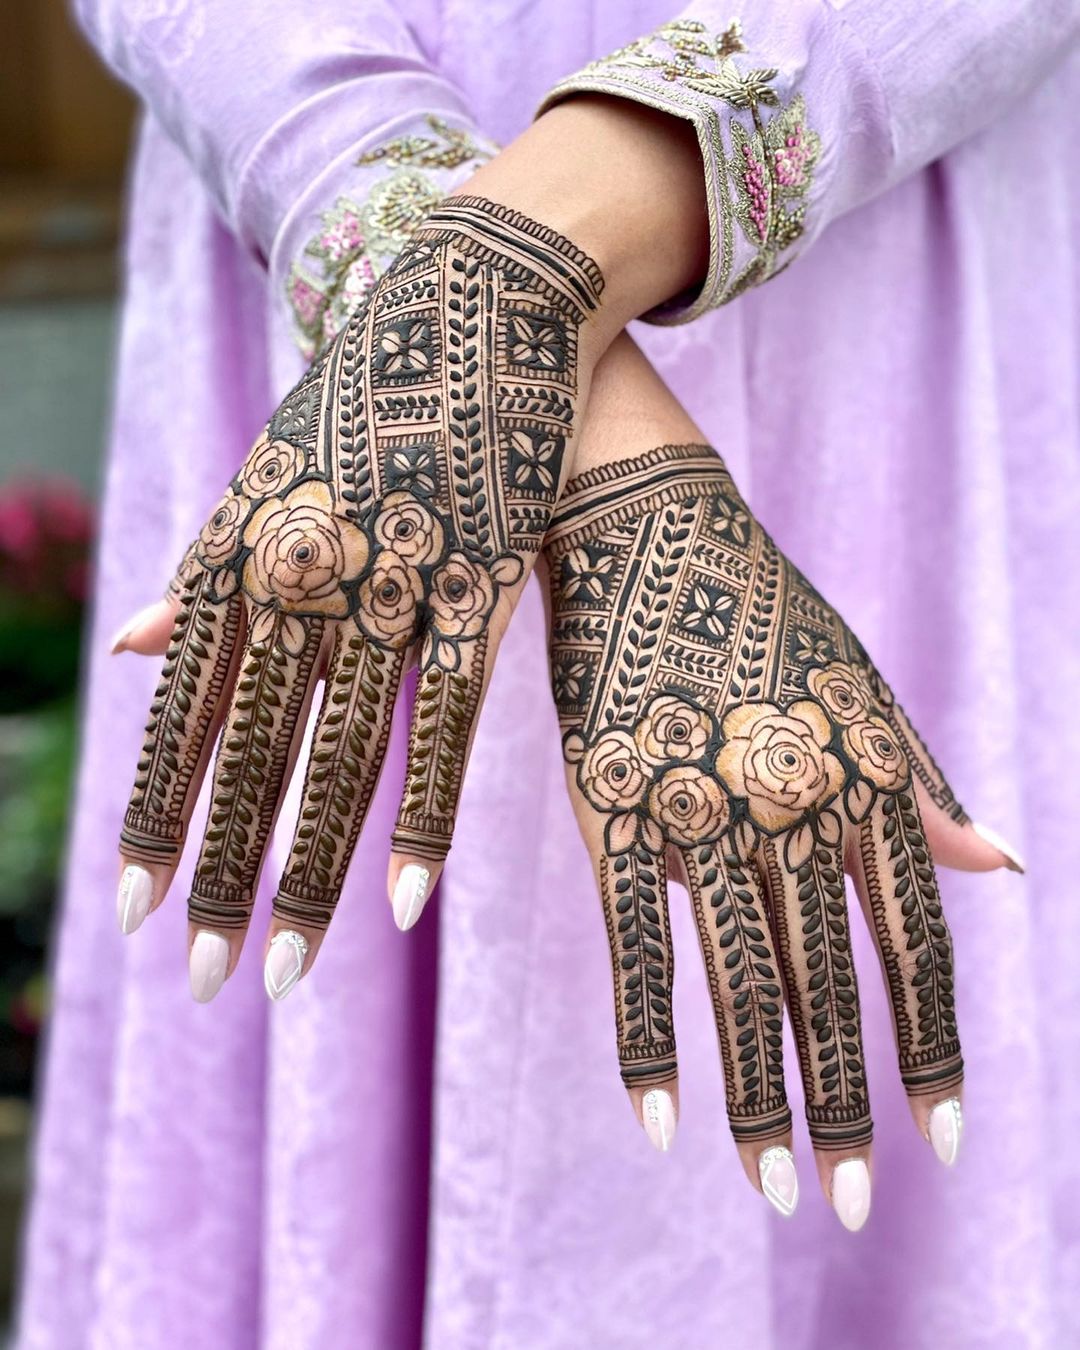 Bridal Henna - Rehna's front hands with Traditional Indian… | Flickr